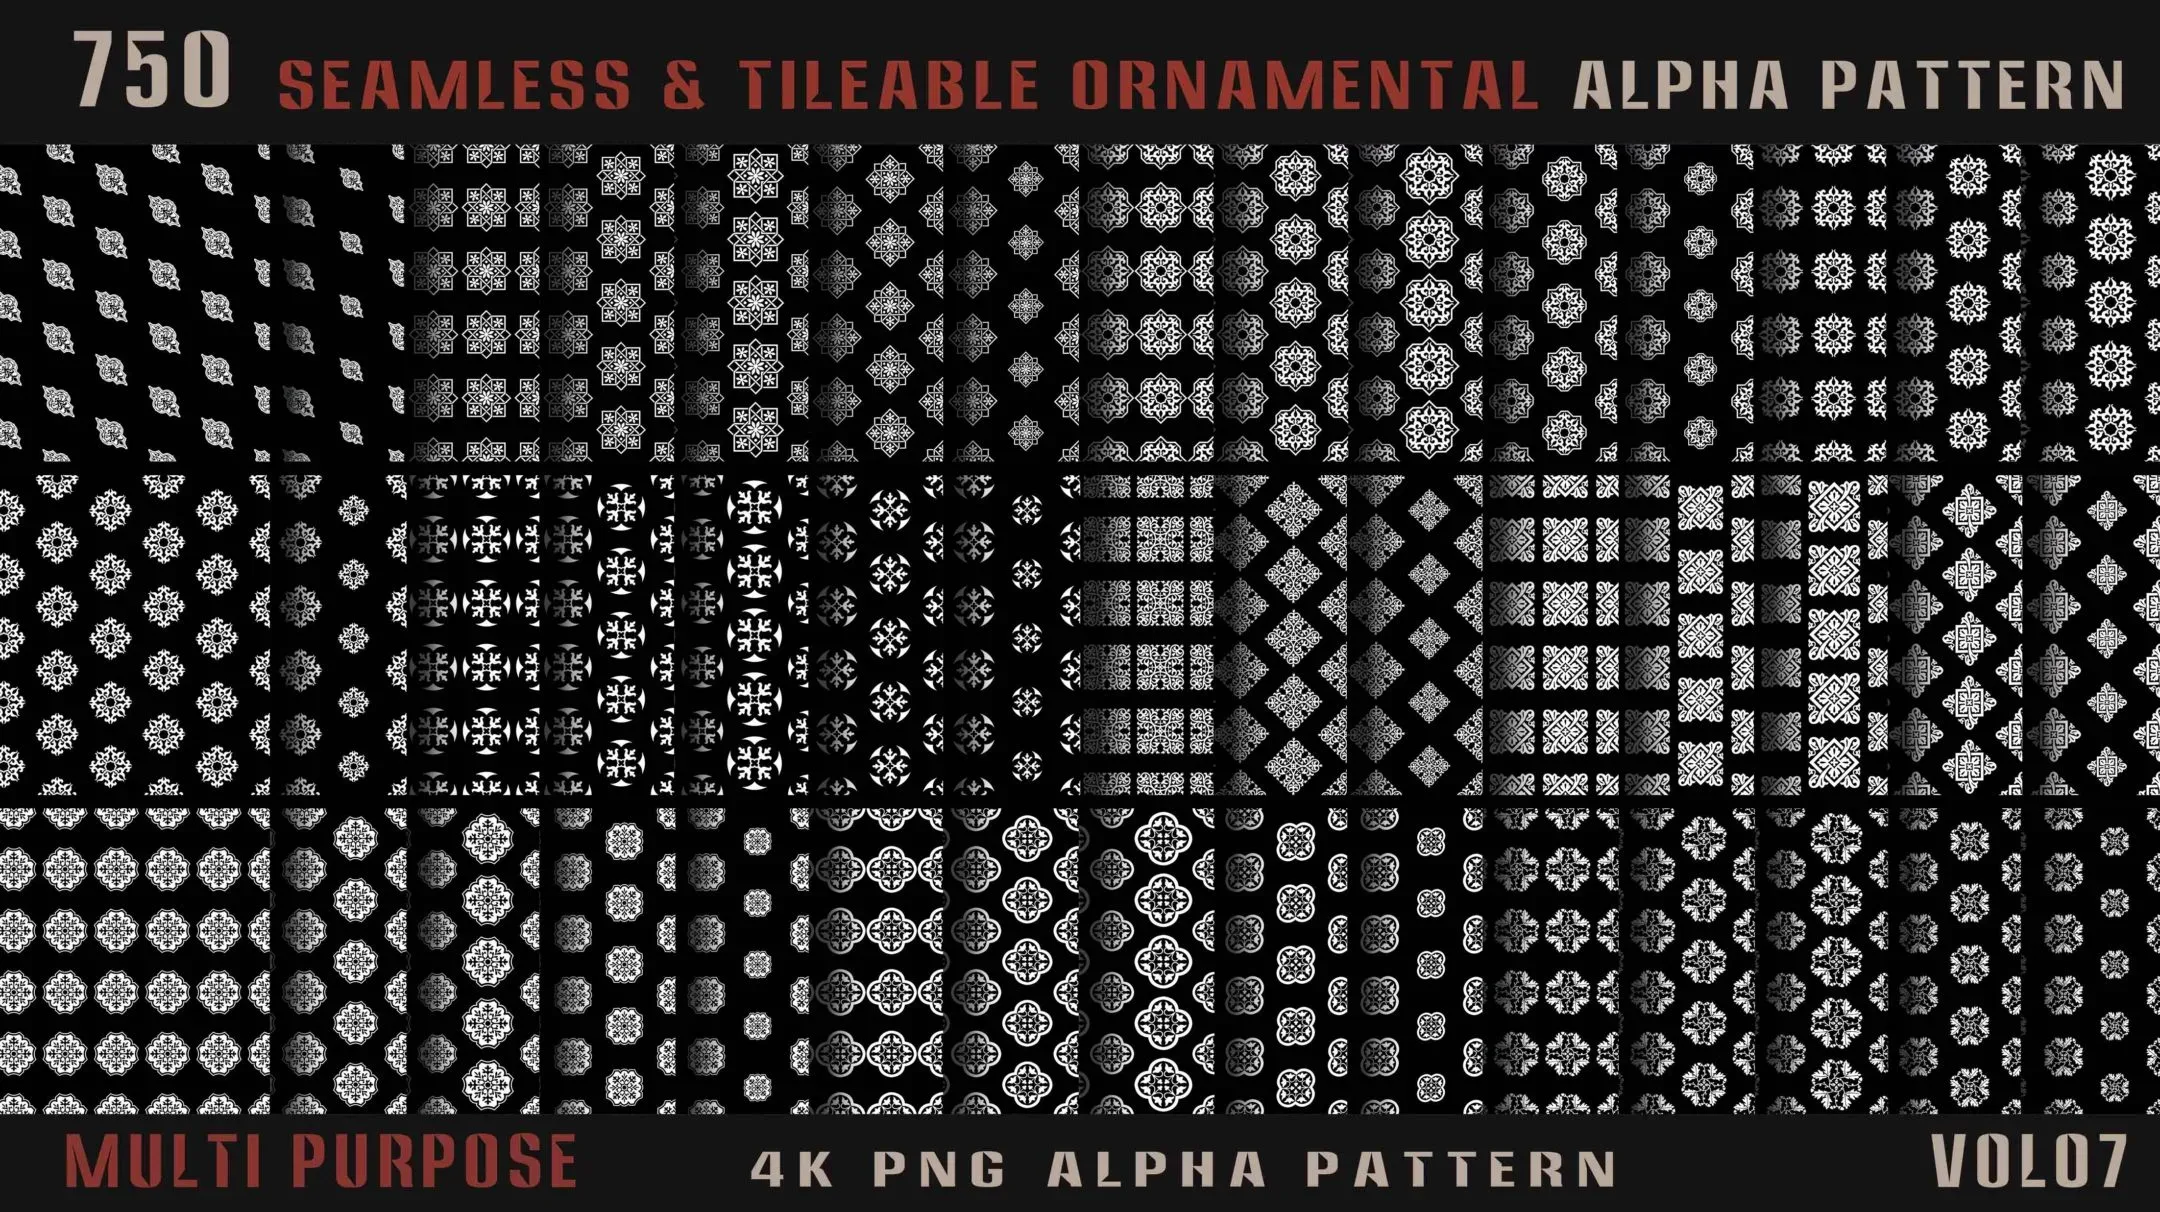 750 seamless and tileable ornamental alpha pattern-Vol07